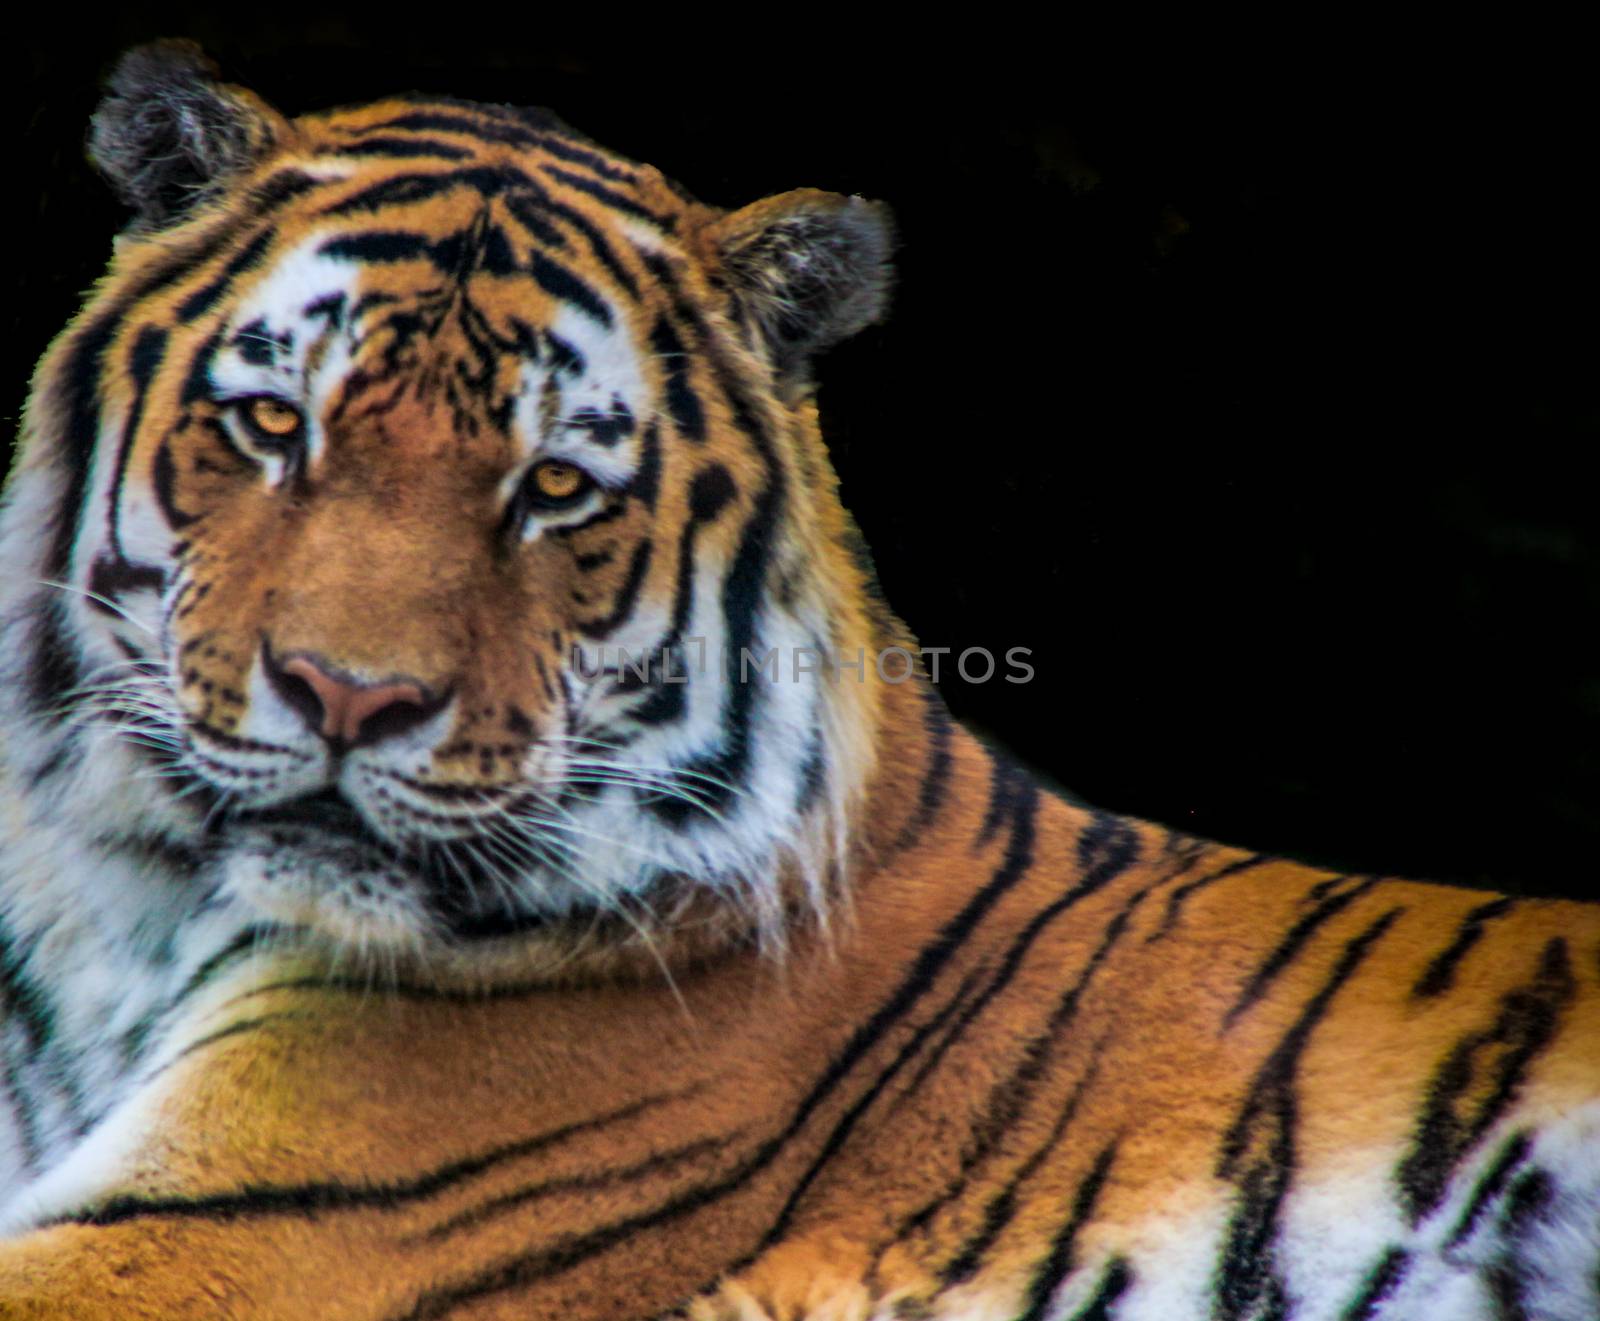 The tiger on the rock on black background. by mynewturtle1